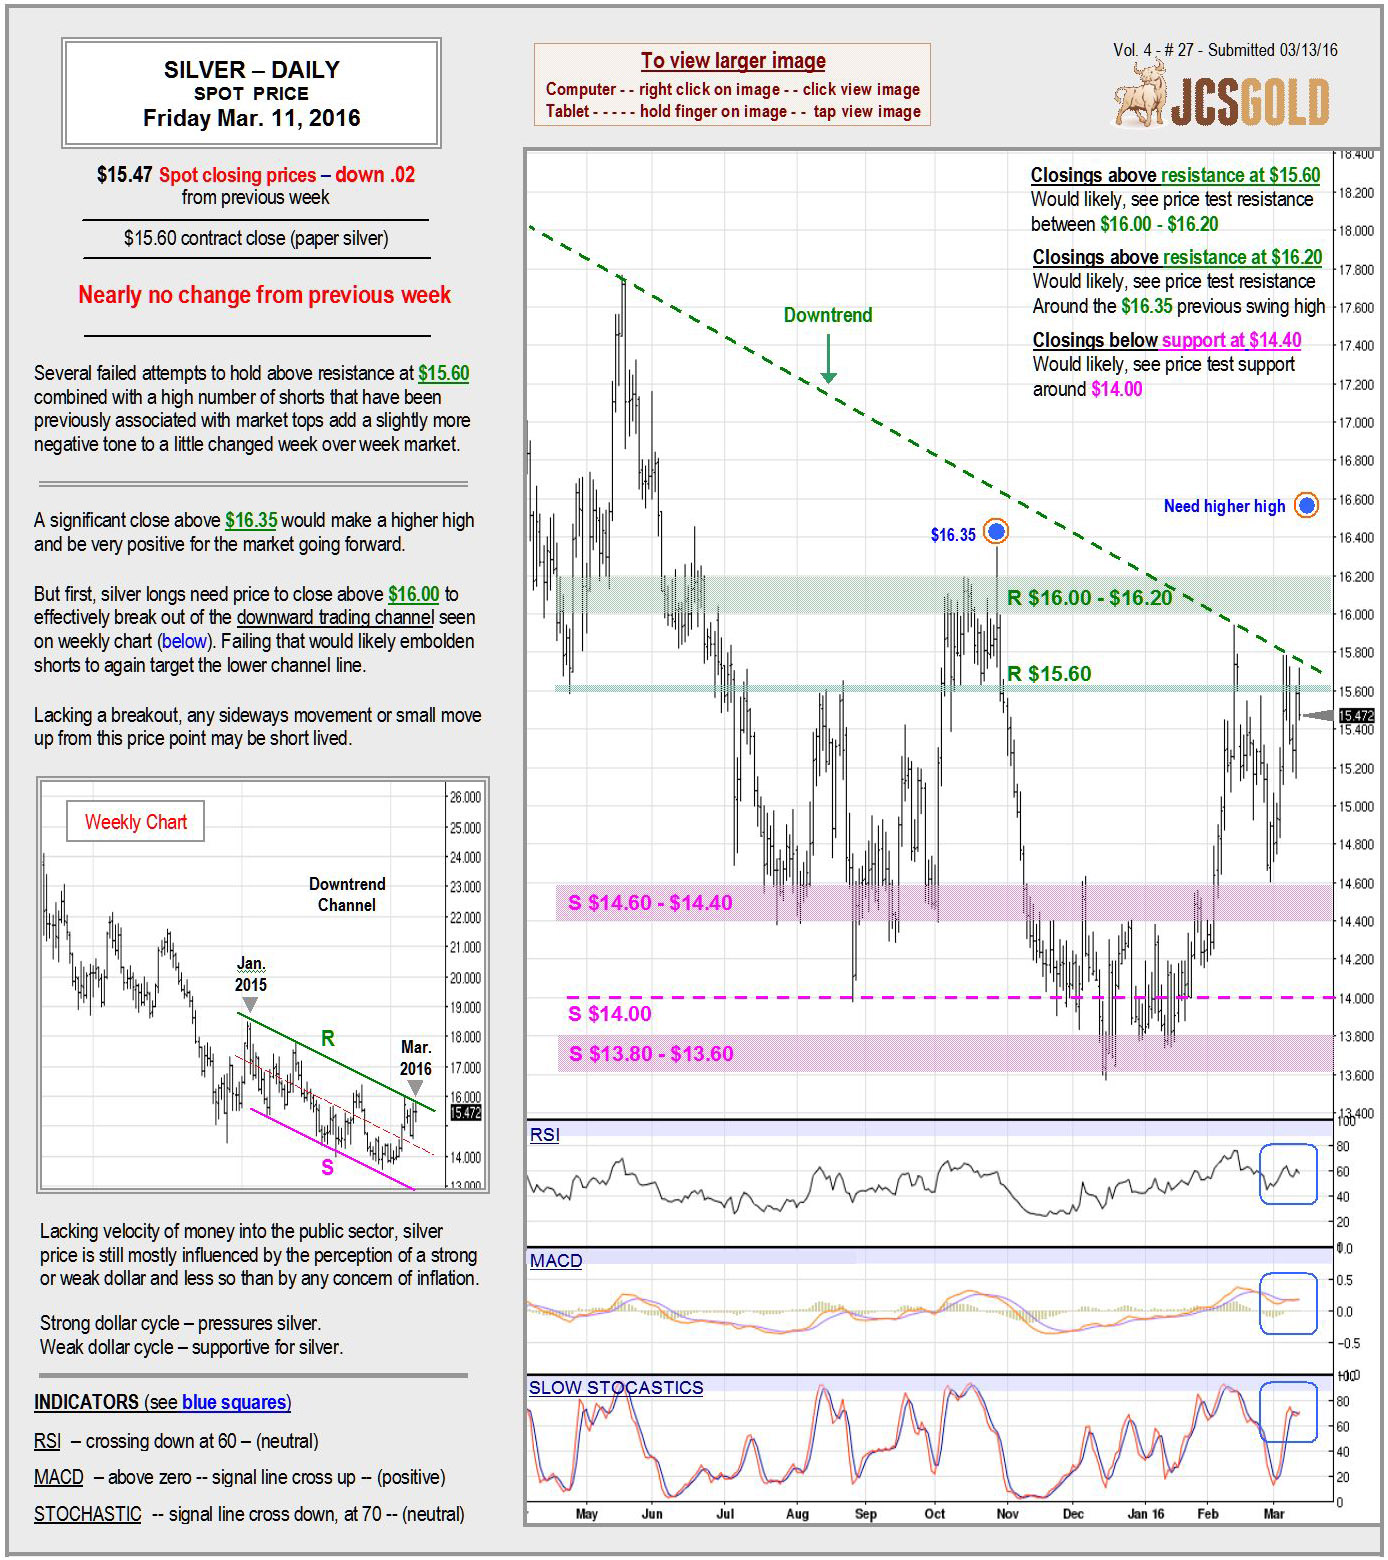 Mar 11, 2016 chart & commentary